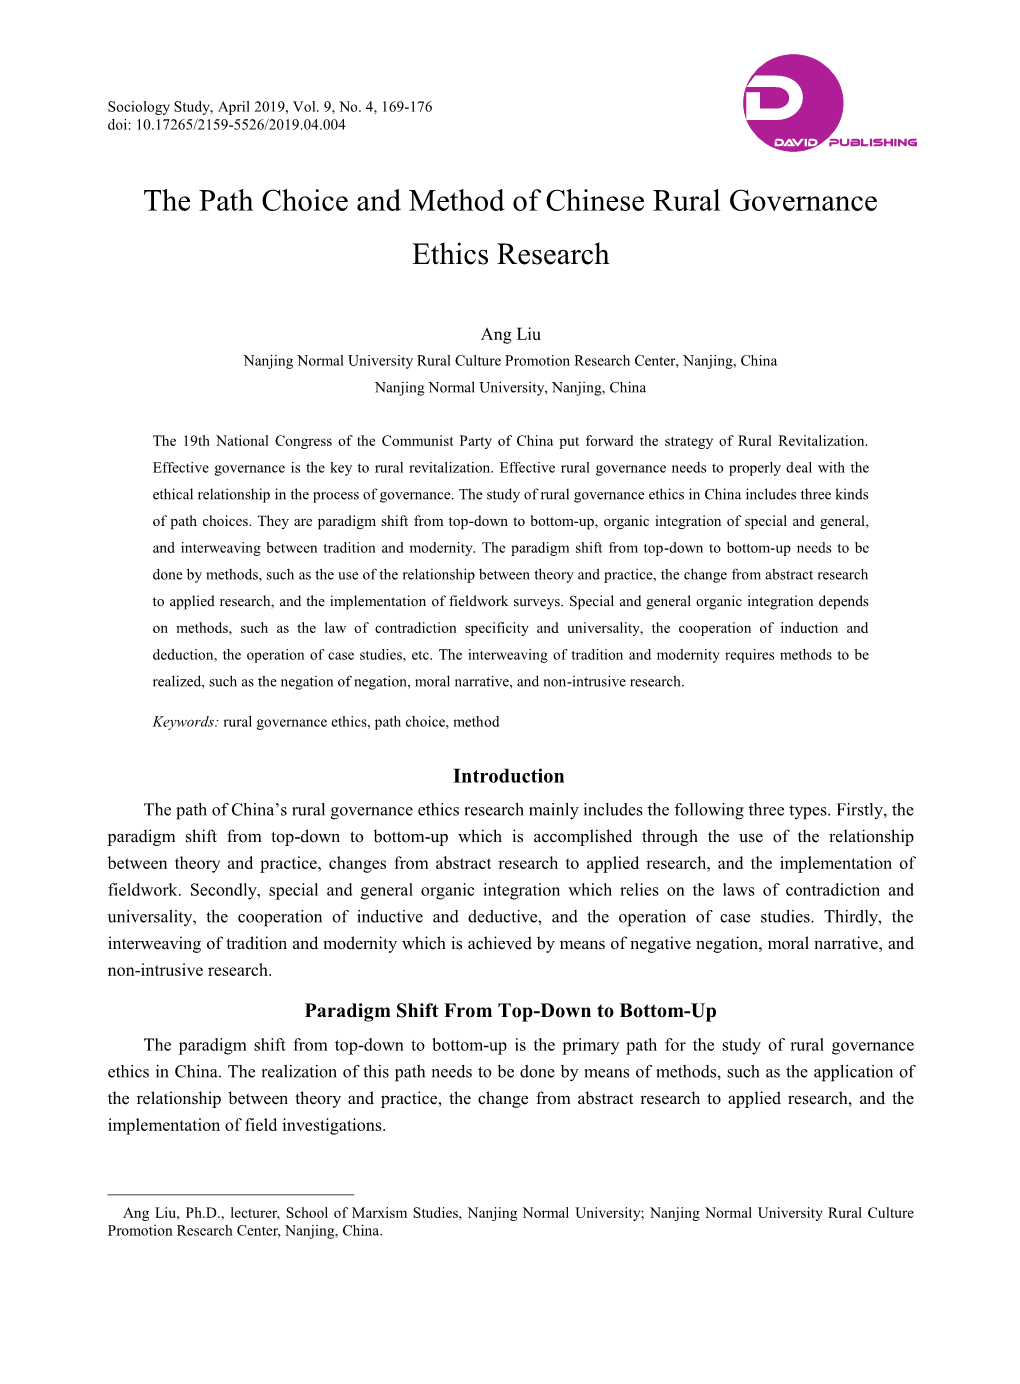 The Path Choice and Method of Chinese Rural Governance Ethics Research